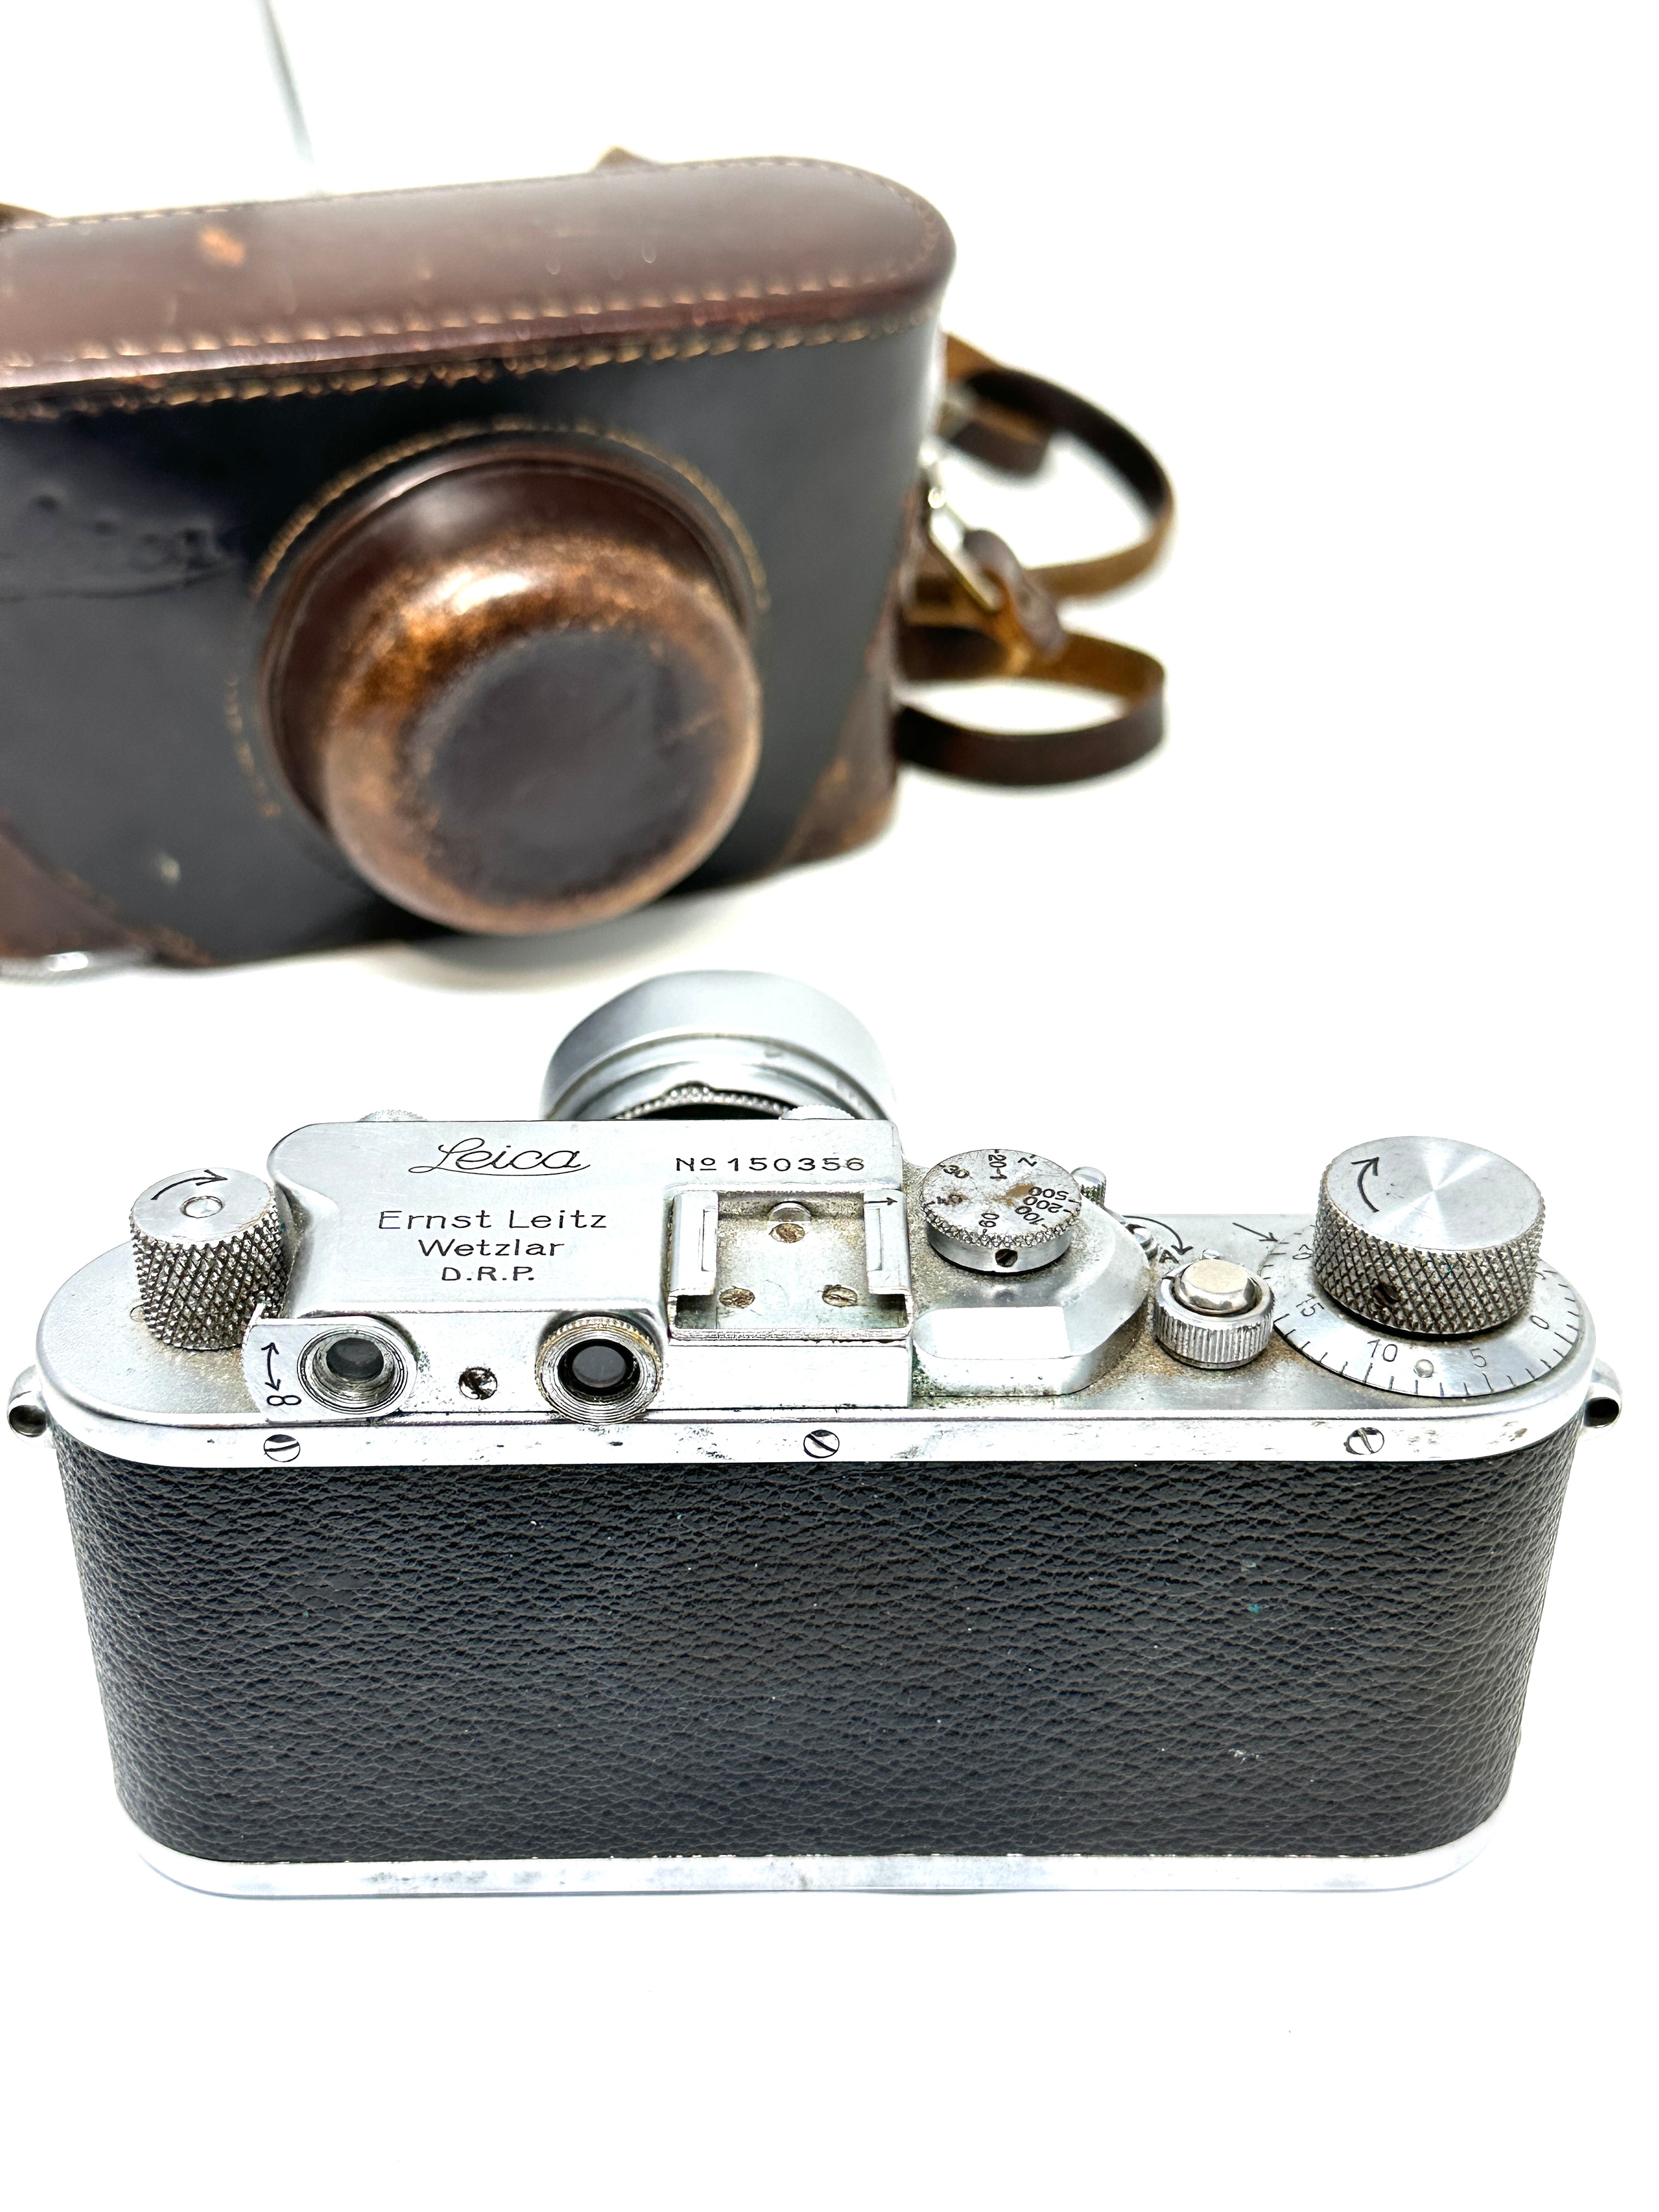 Vintage leica camera original leather cased reads Leica N 150356 Ernst Leitz d.r.p also reads on - Image 4 of 10